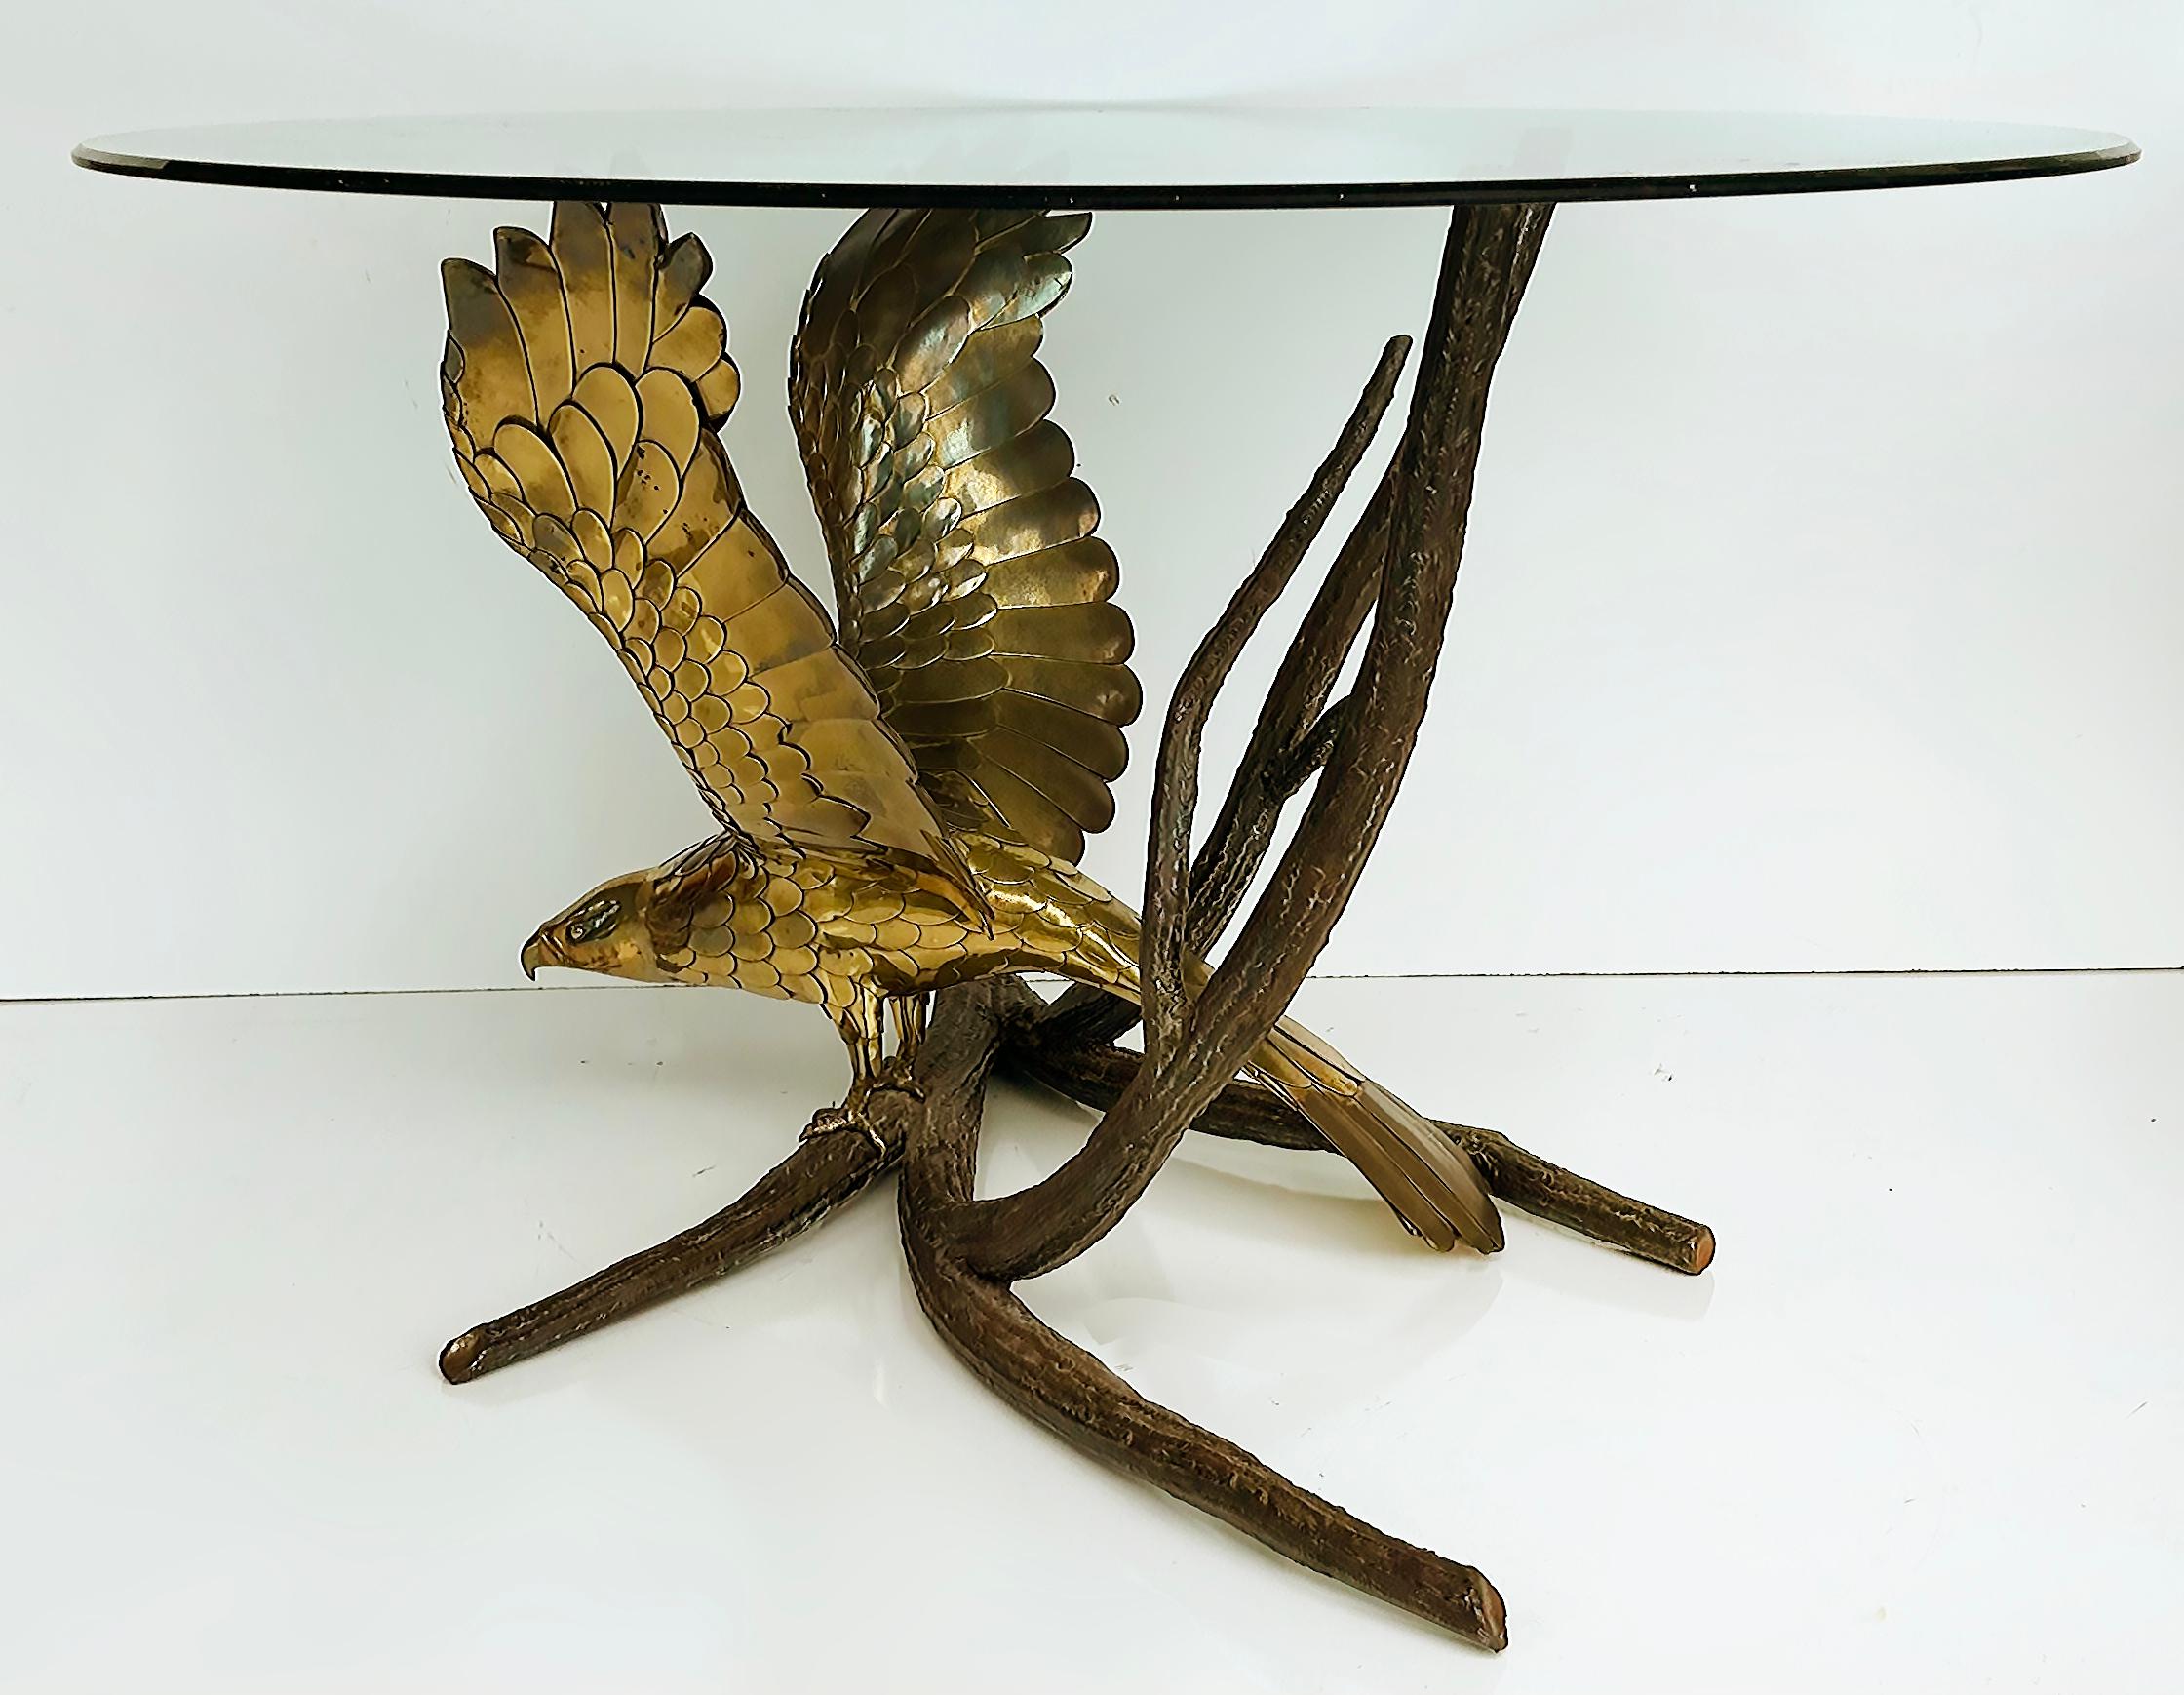  Alain Chervet French Sculptural Eagle Dining Center Table in Bronze and Brass For Sale 11